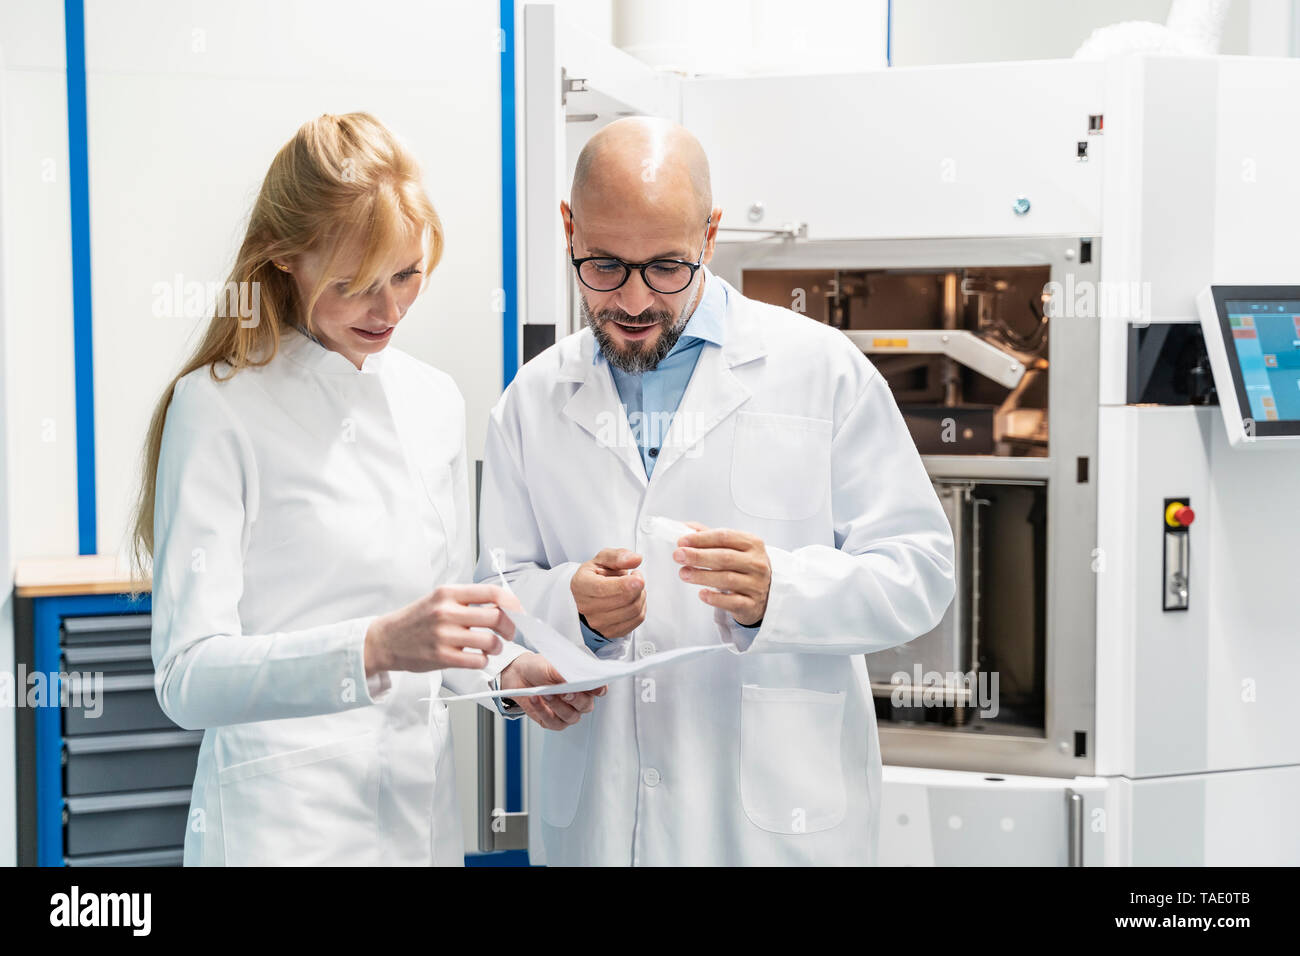 Two technicians wearing lab coats discussing plan Stock Photo